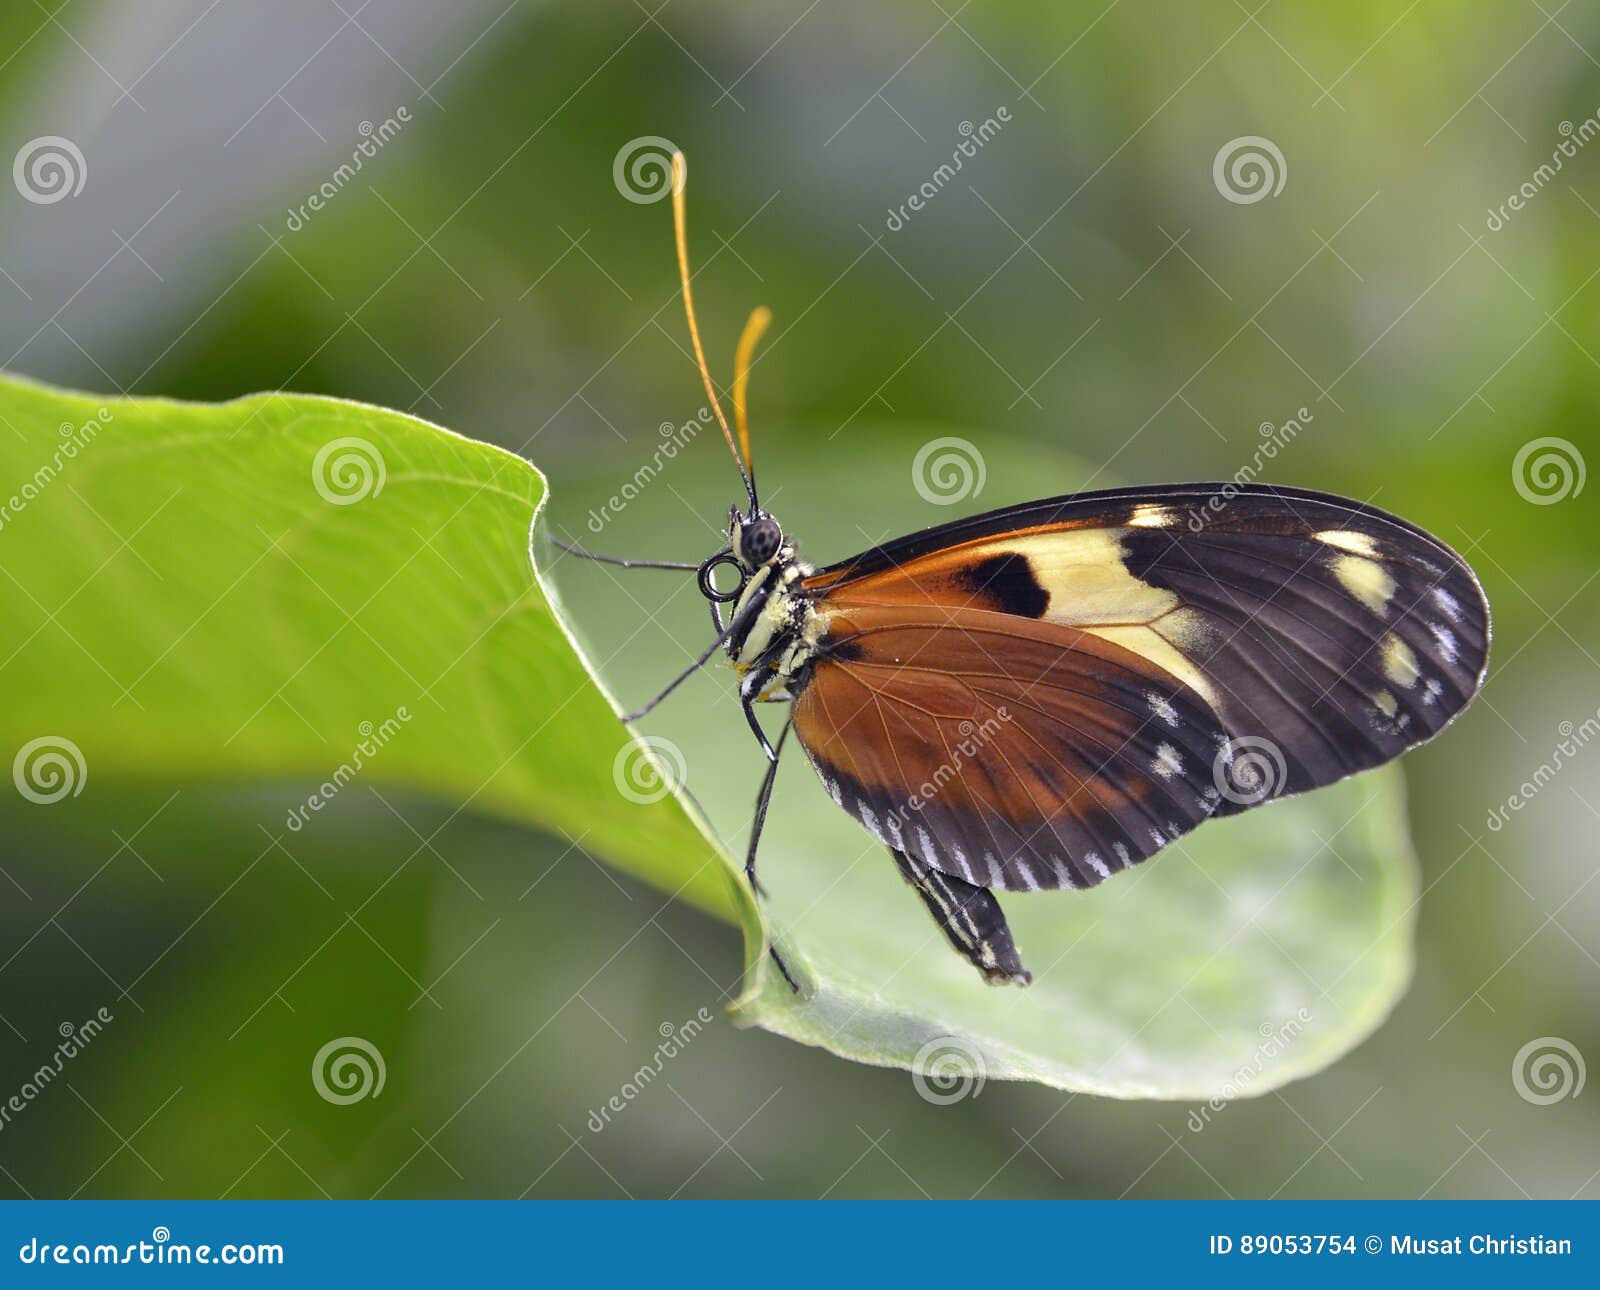 nymphalidae butterfly on leaf